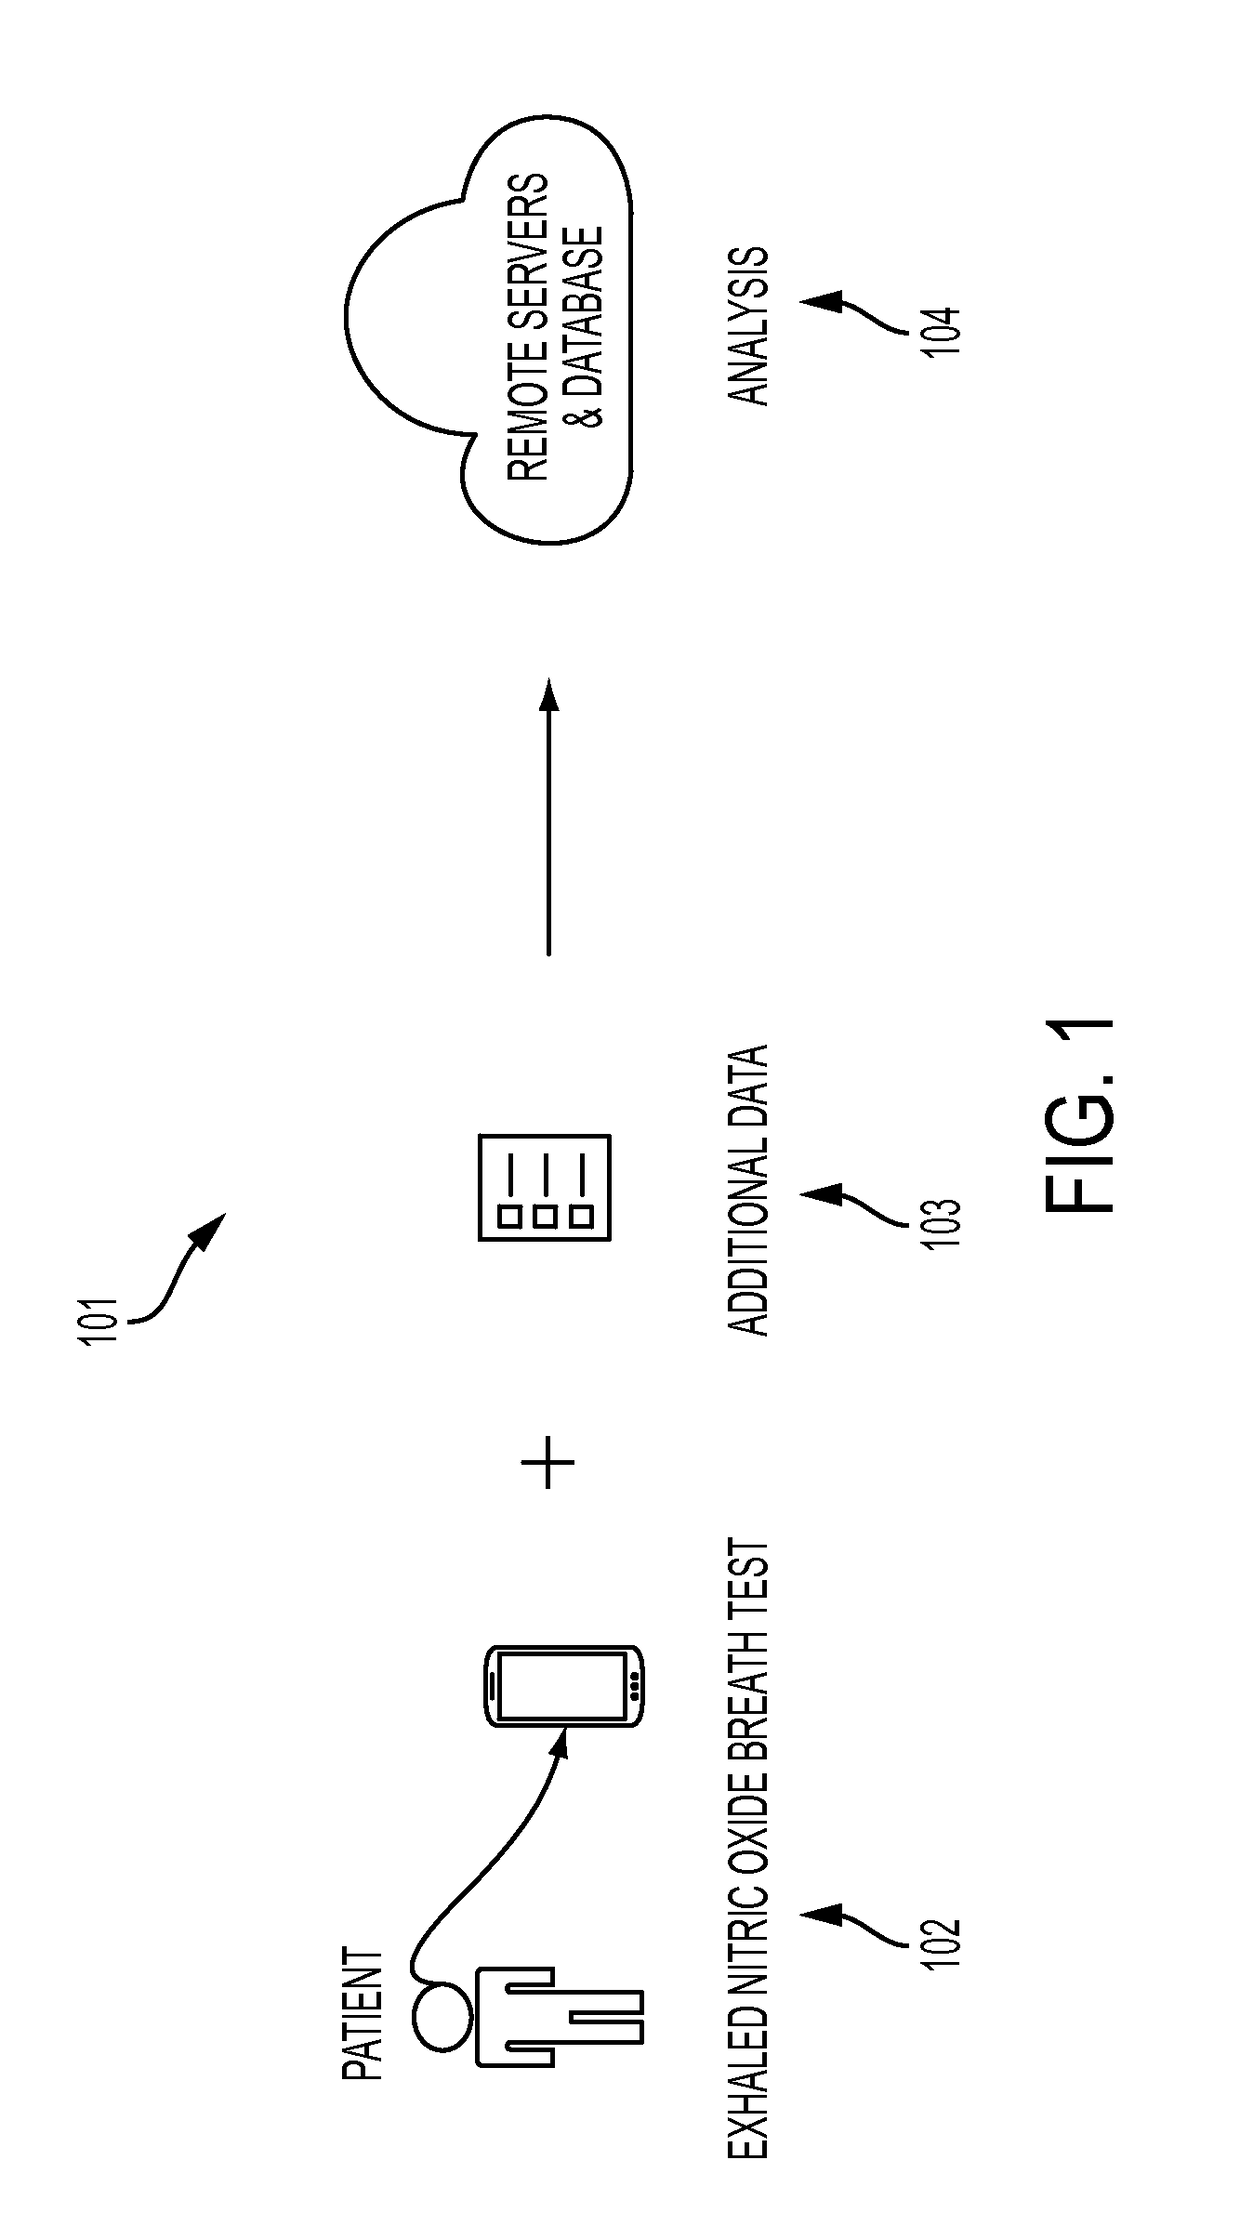 Low cost test strip and method to measure analyte